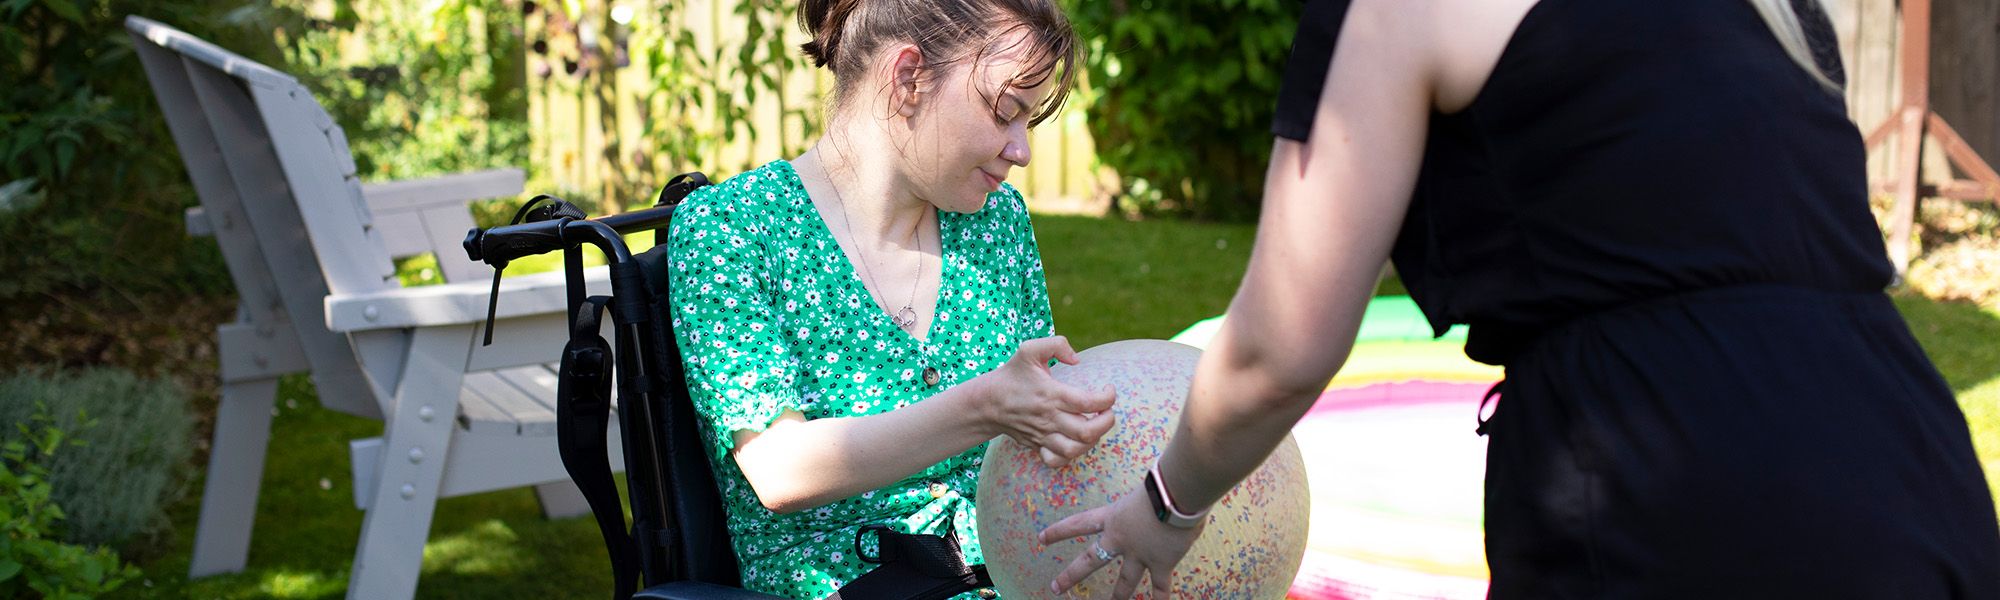 What it’s like being a support worker with Autism